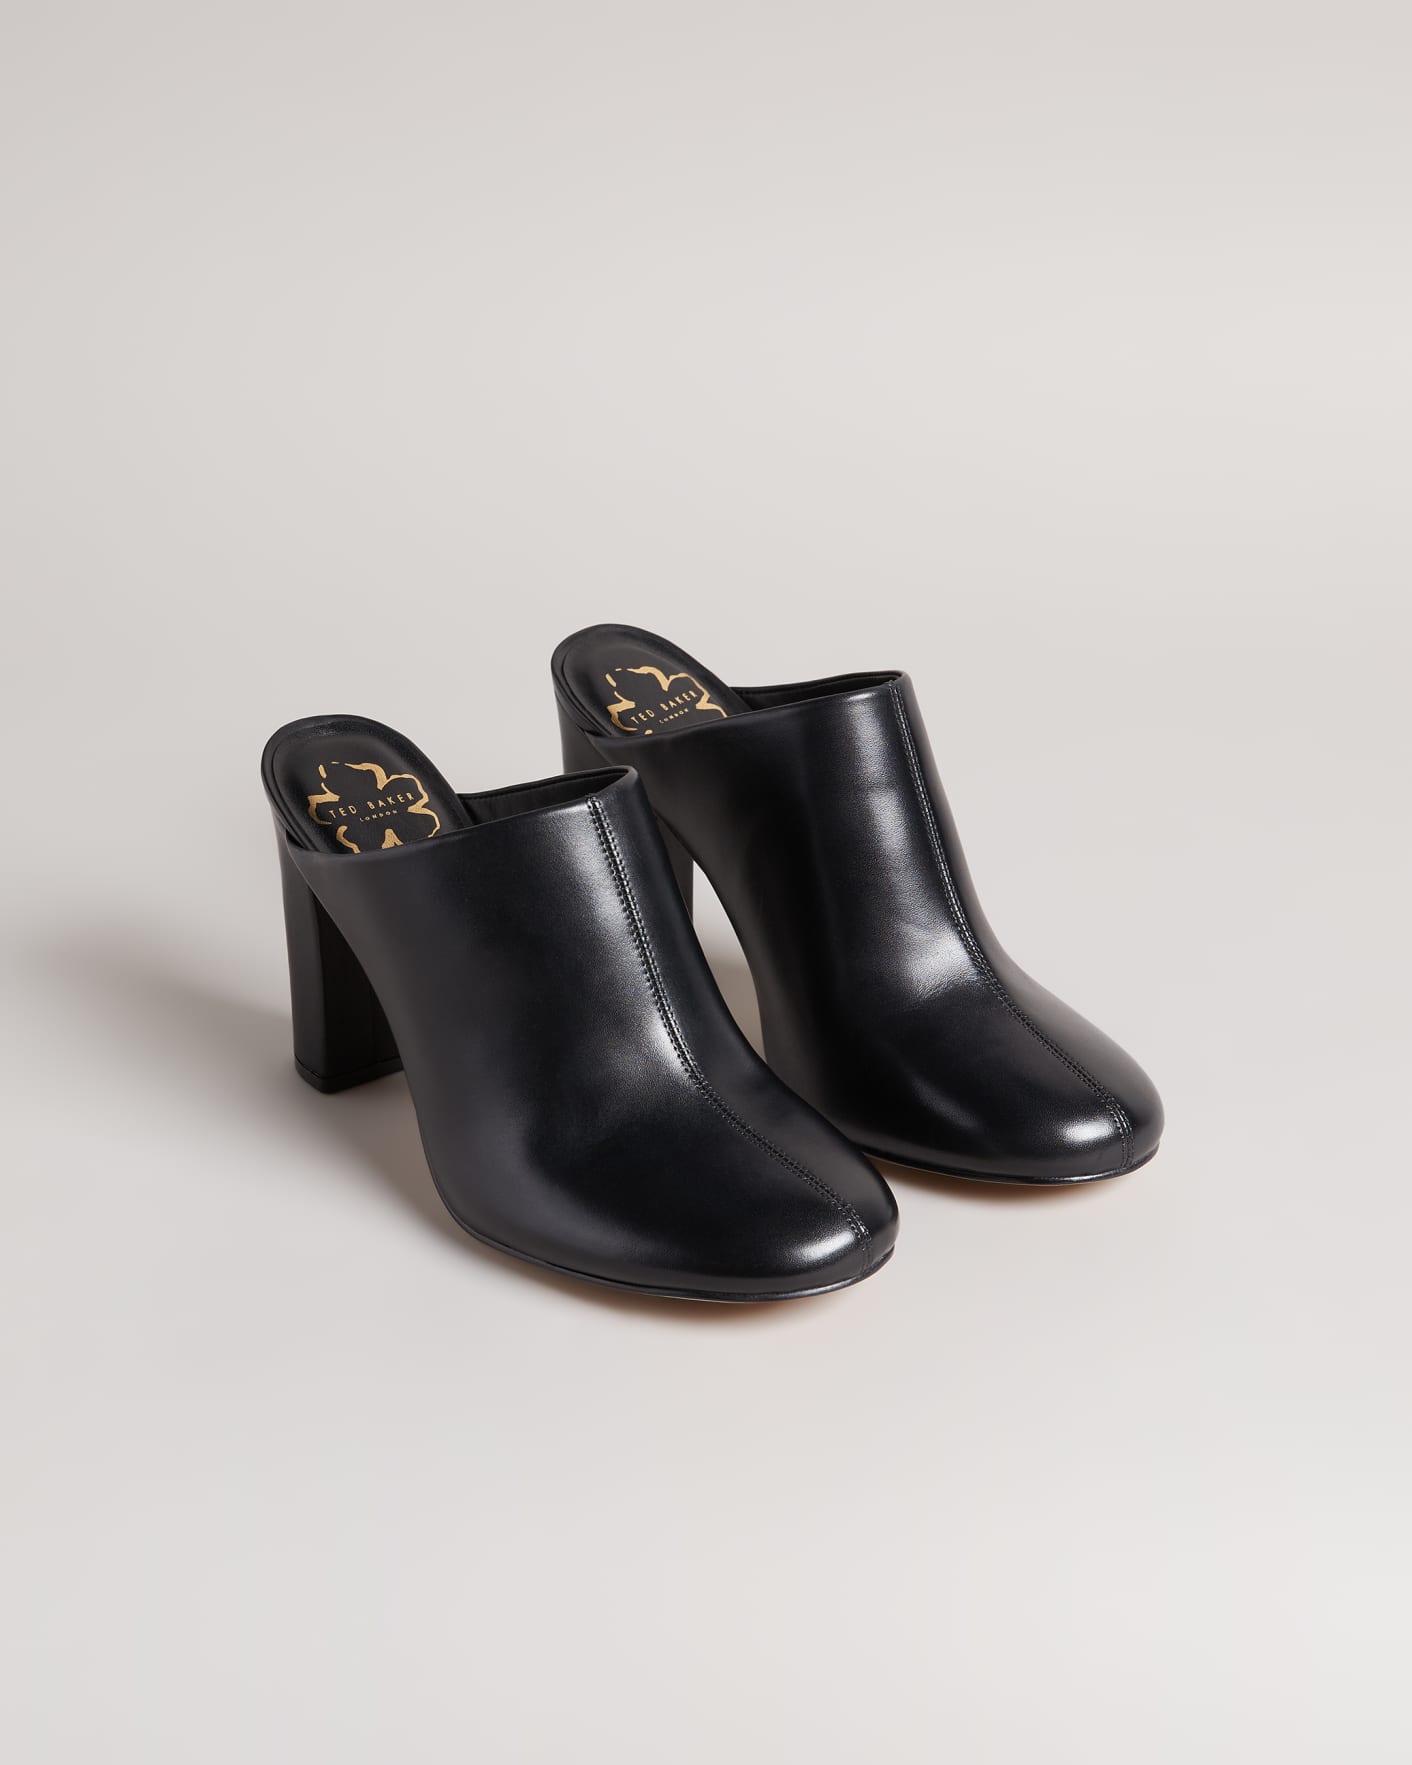 Black Leather Heeled Mule Shoes Ted Baker